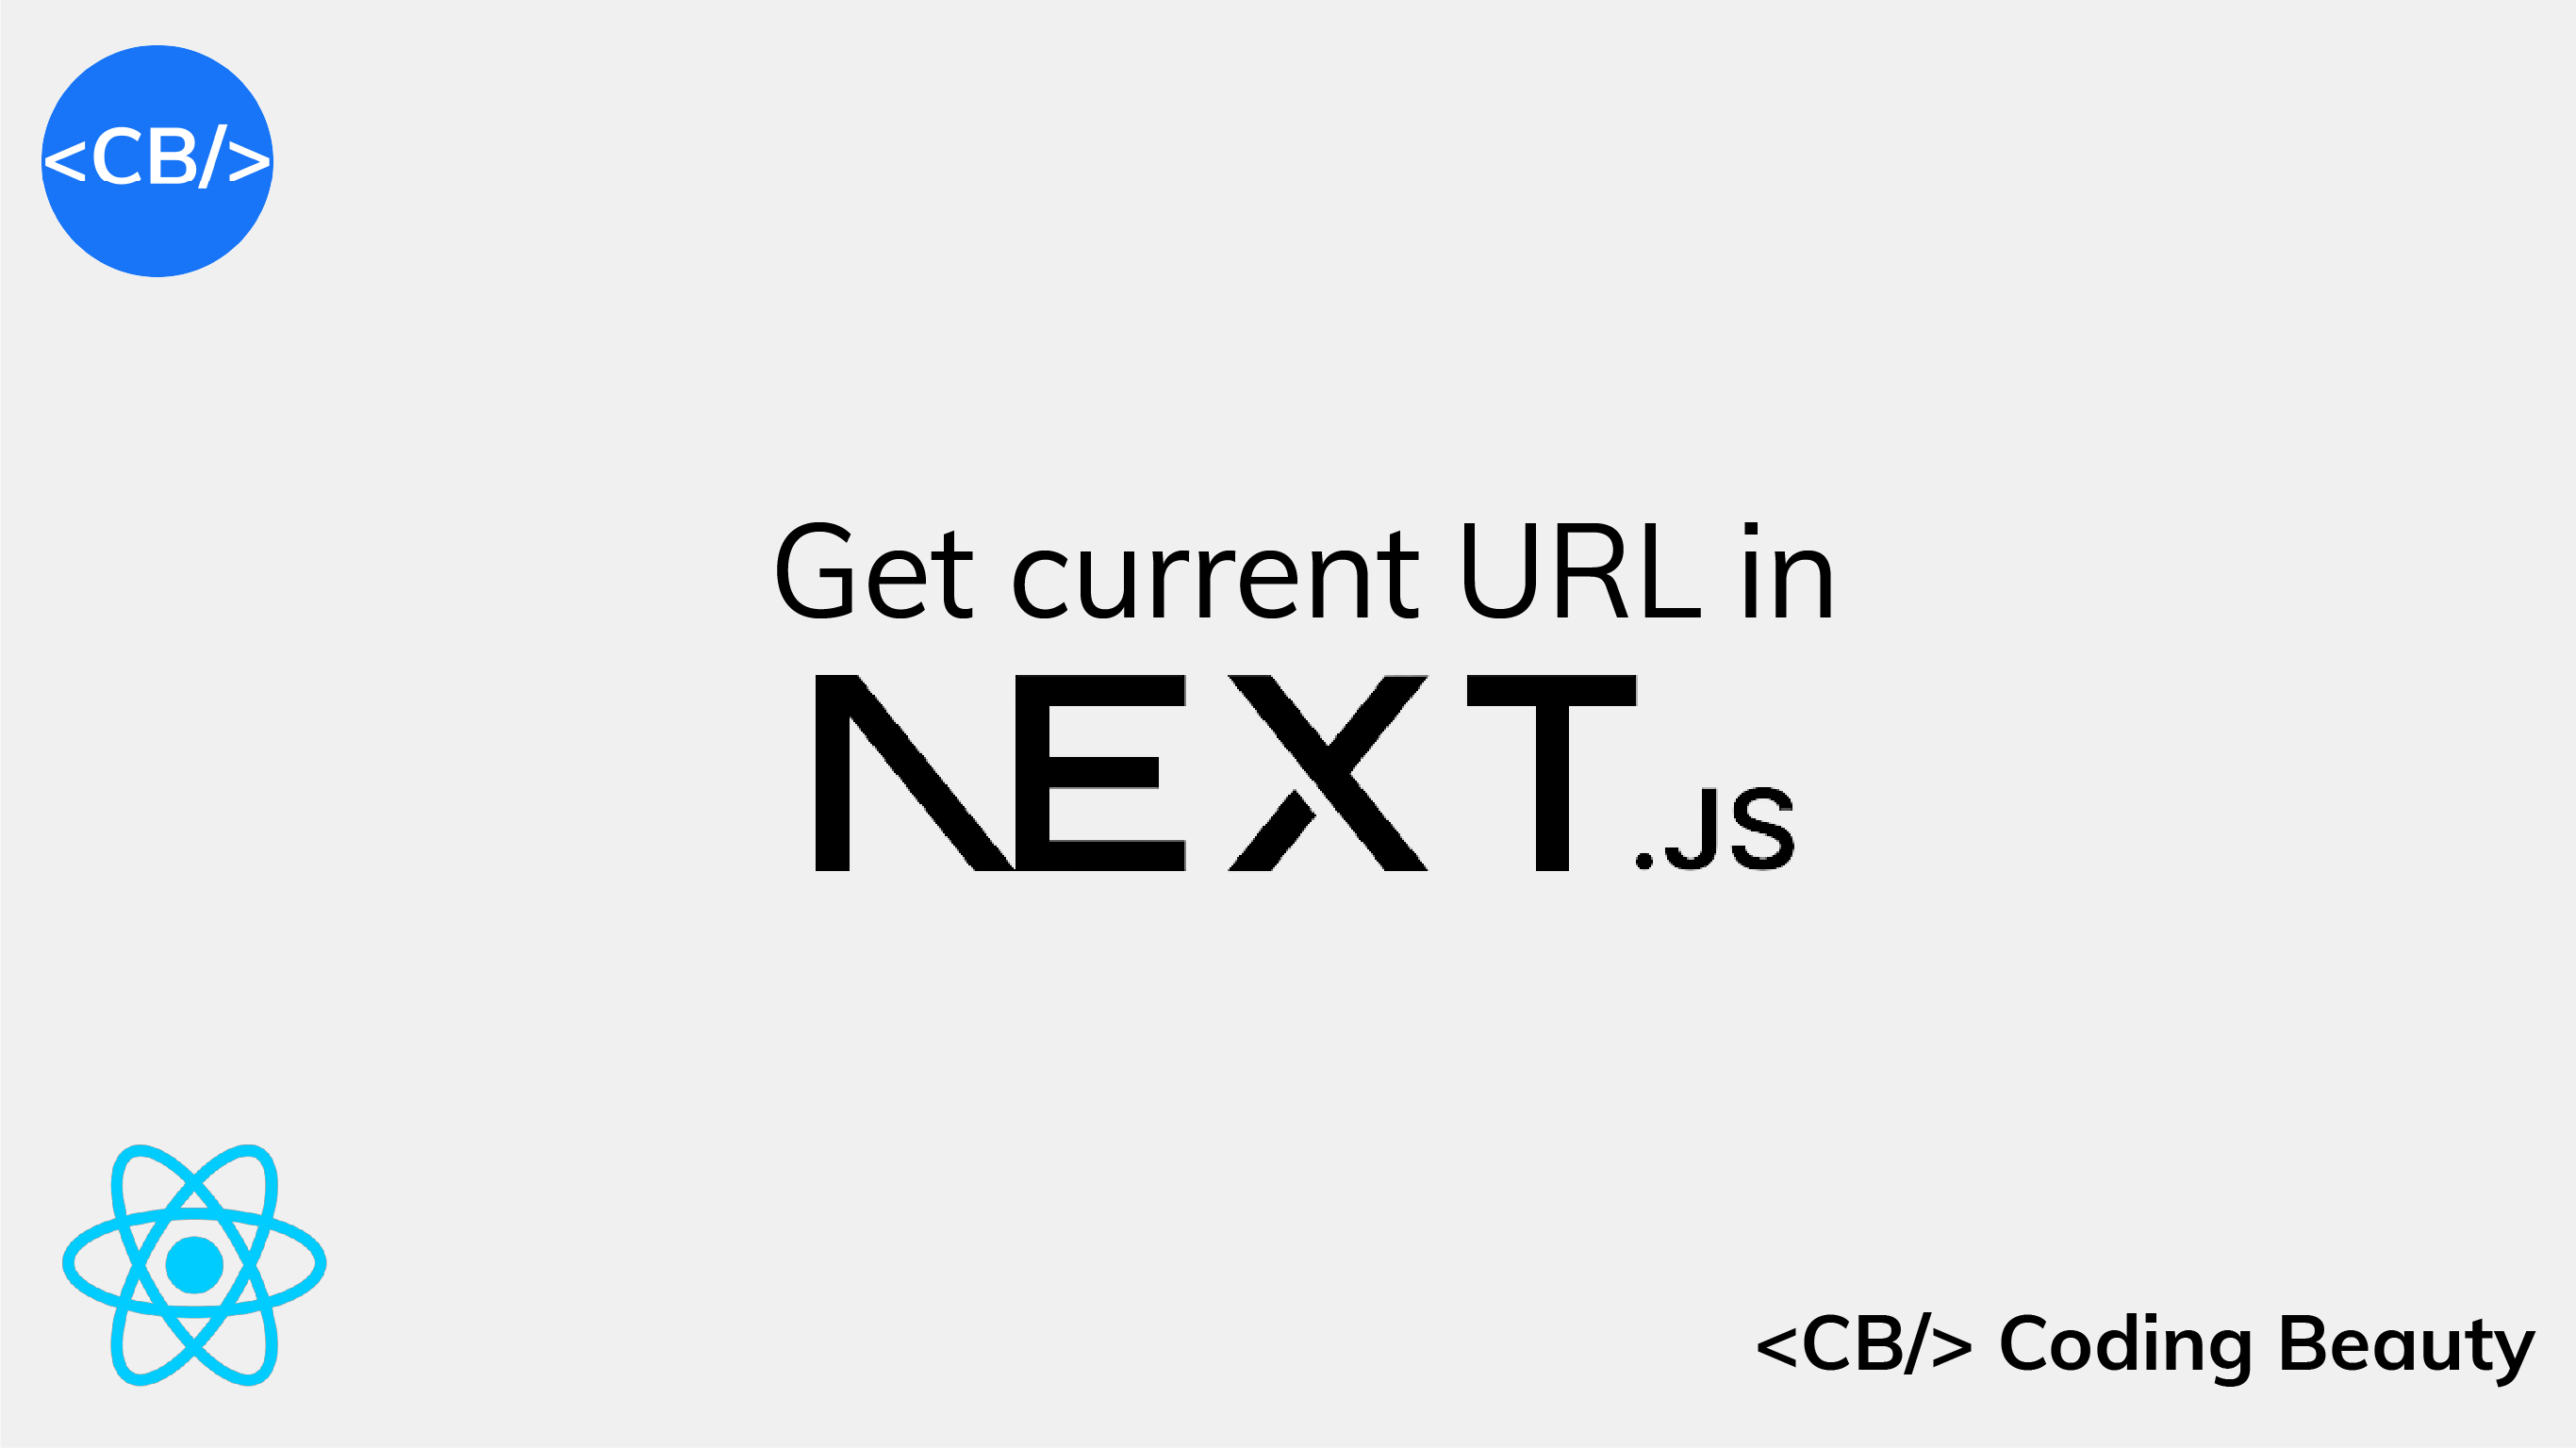 How to easily get the current URL in Next.js